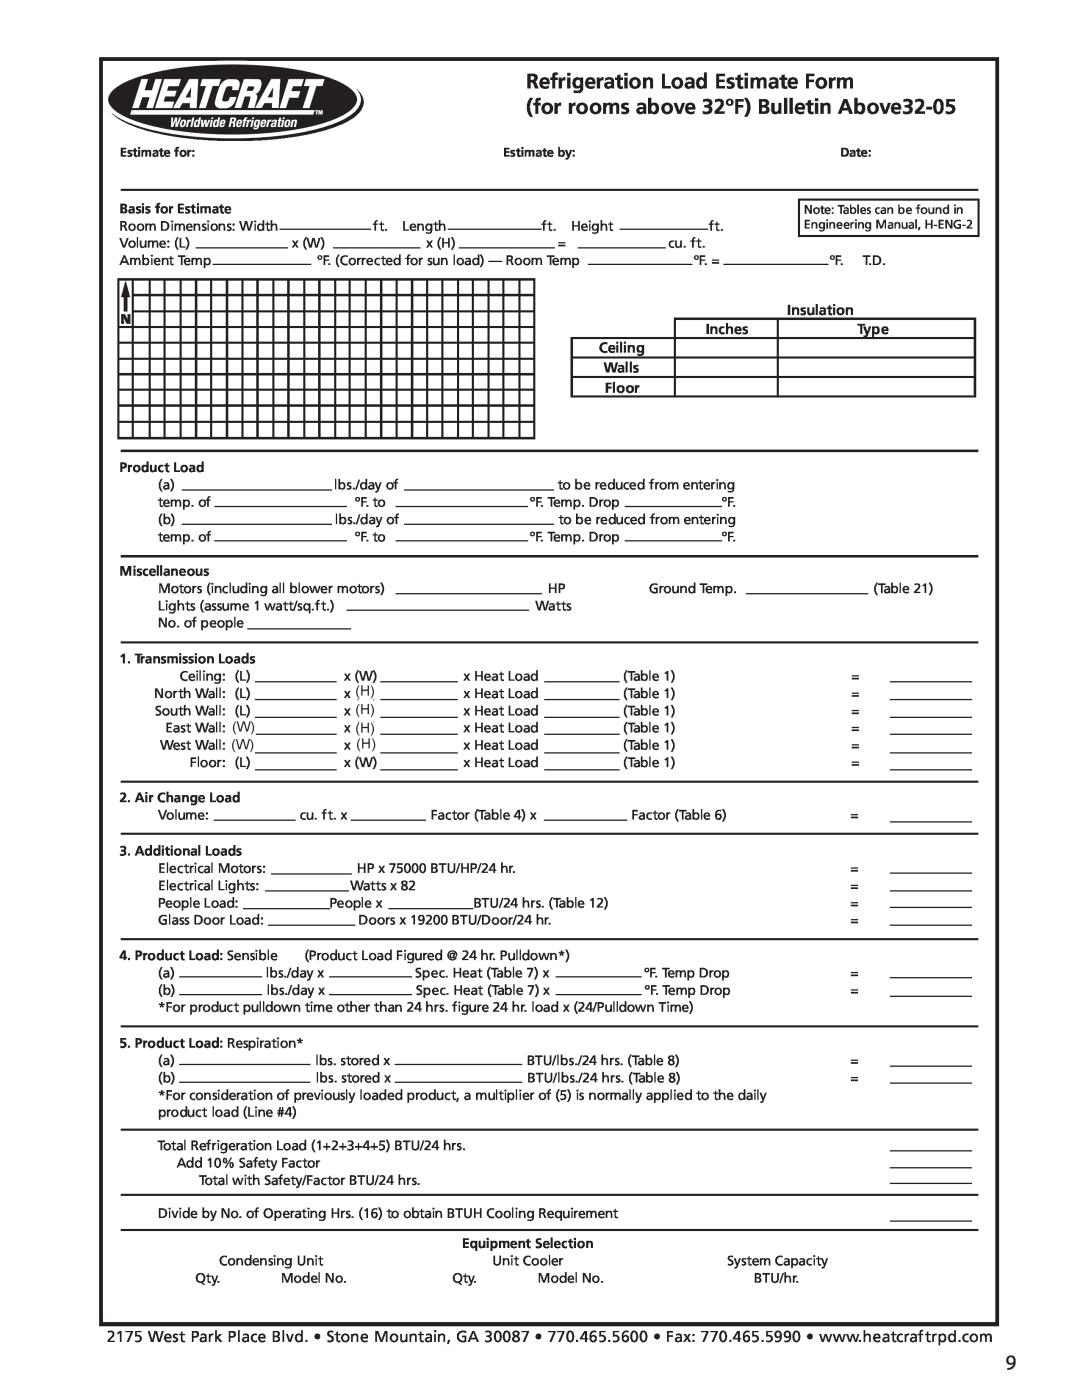 Heatcraft Refrigeration Products H-ENGM0408 Refrigeration Load Estimate Form, for rooms above 32ºF Bulletin Above32-05 